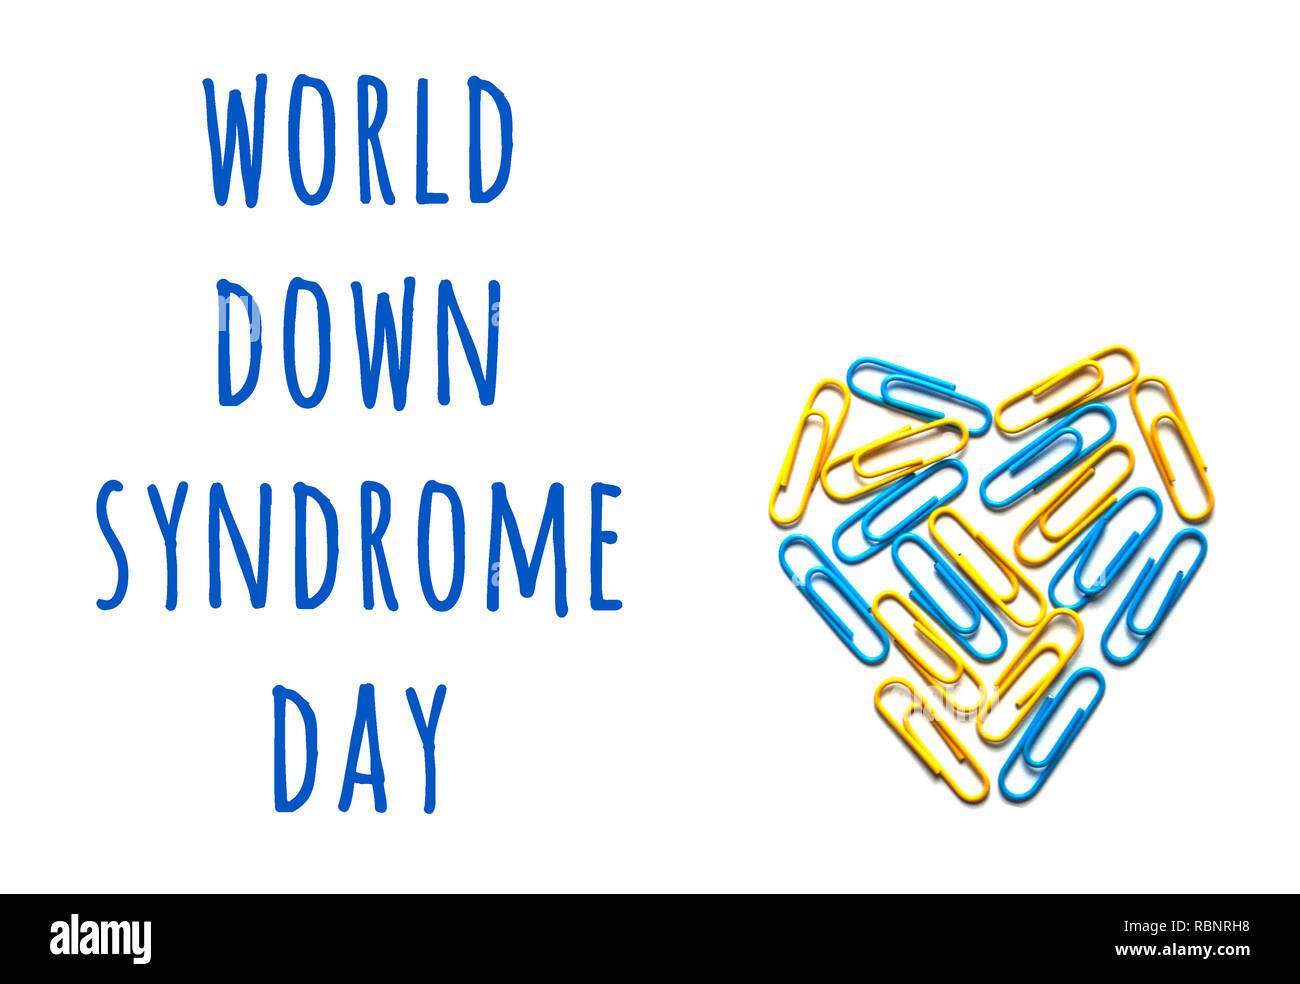 World down syndrome day. Down syndrome day concept with yellow and blue heart isolated on white background with copyspace. Stock Photo